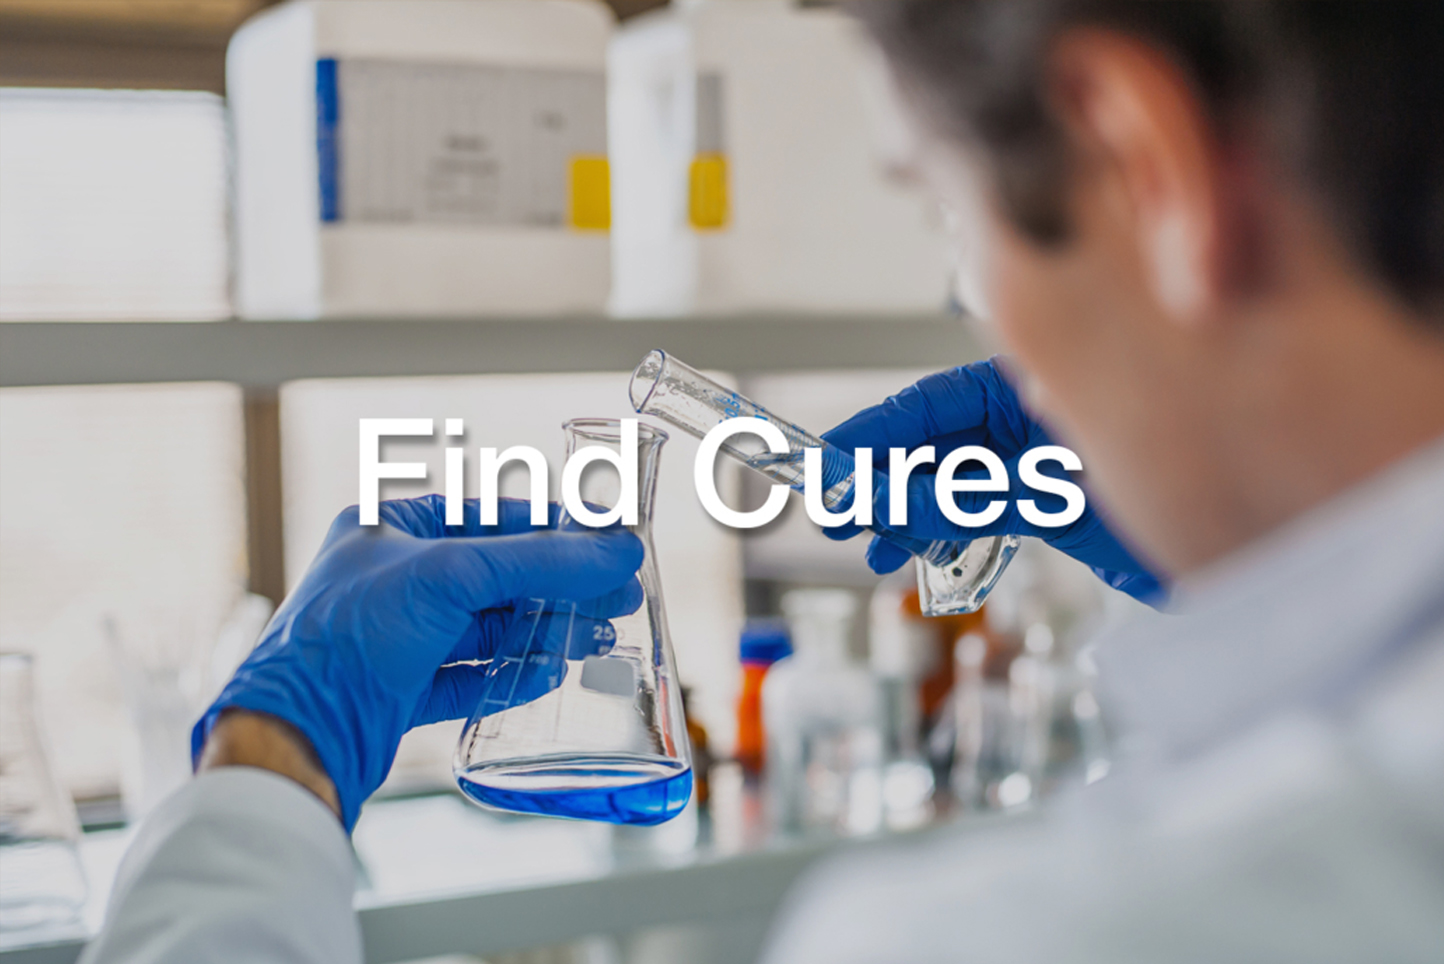 Tony's Charitable Foundation: Find Cures